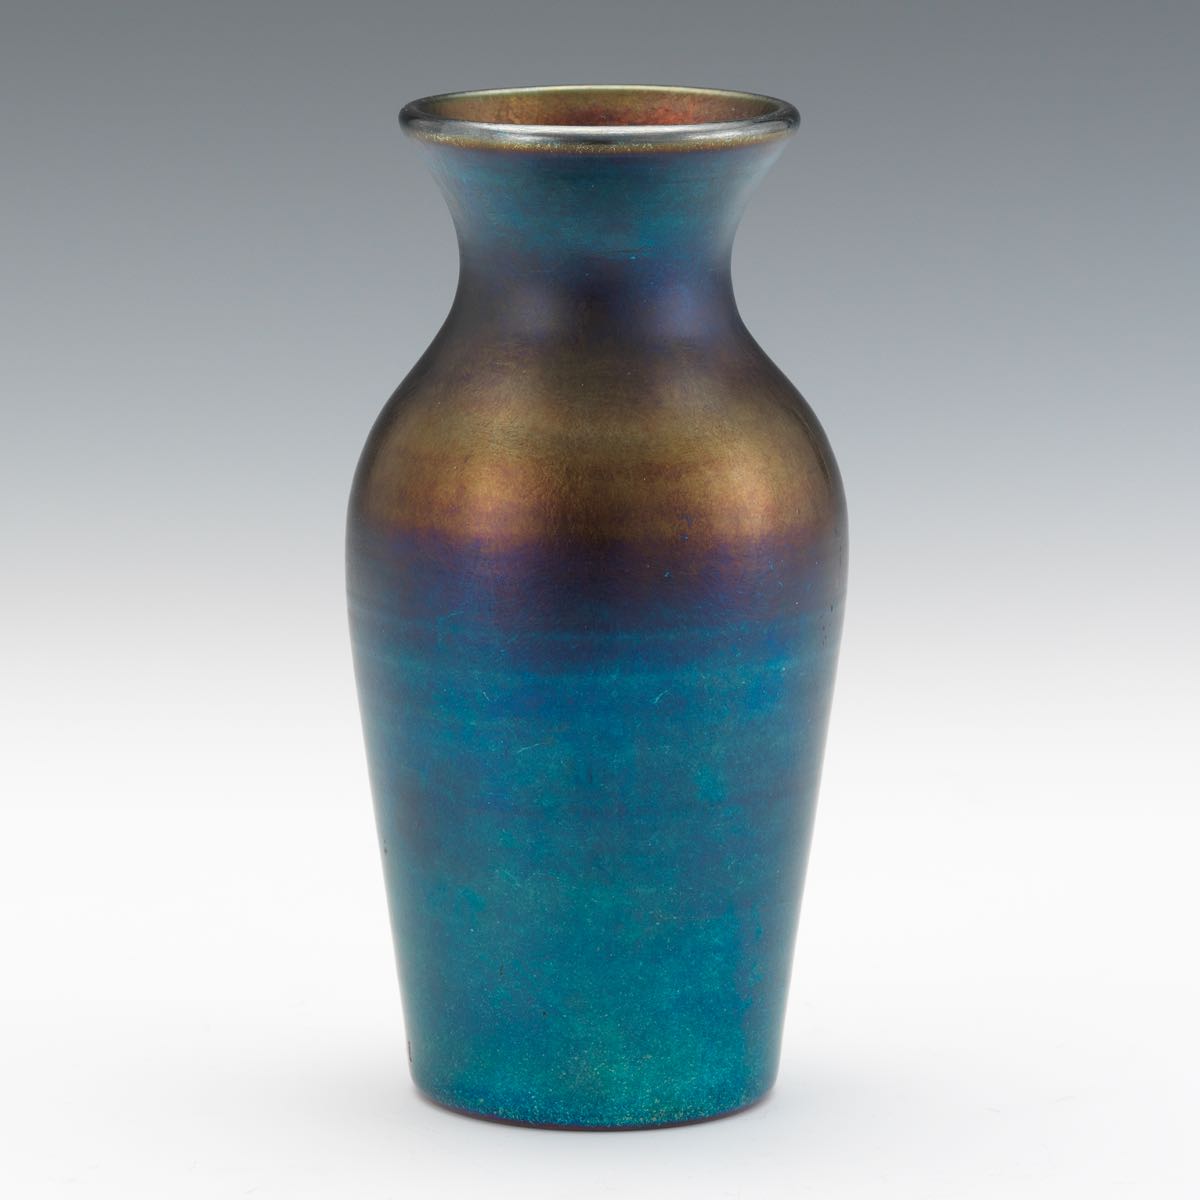 Signed Quezal Iridescent Glass Vase 6 1/2" TBeautiful blue glass vase with hints of green gold. - Image 3 of 7